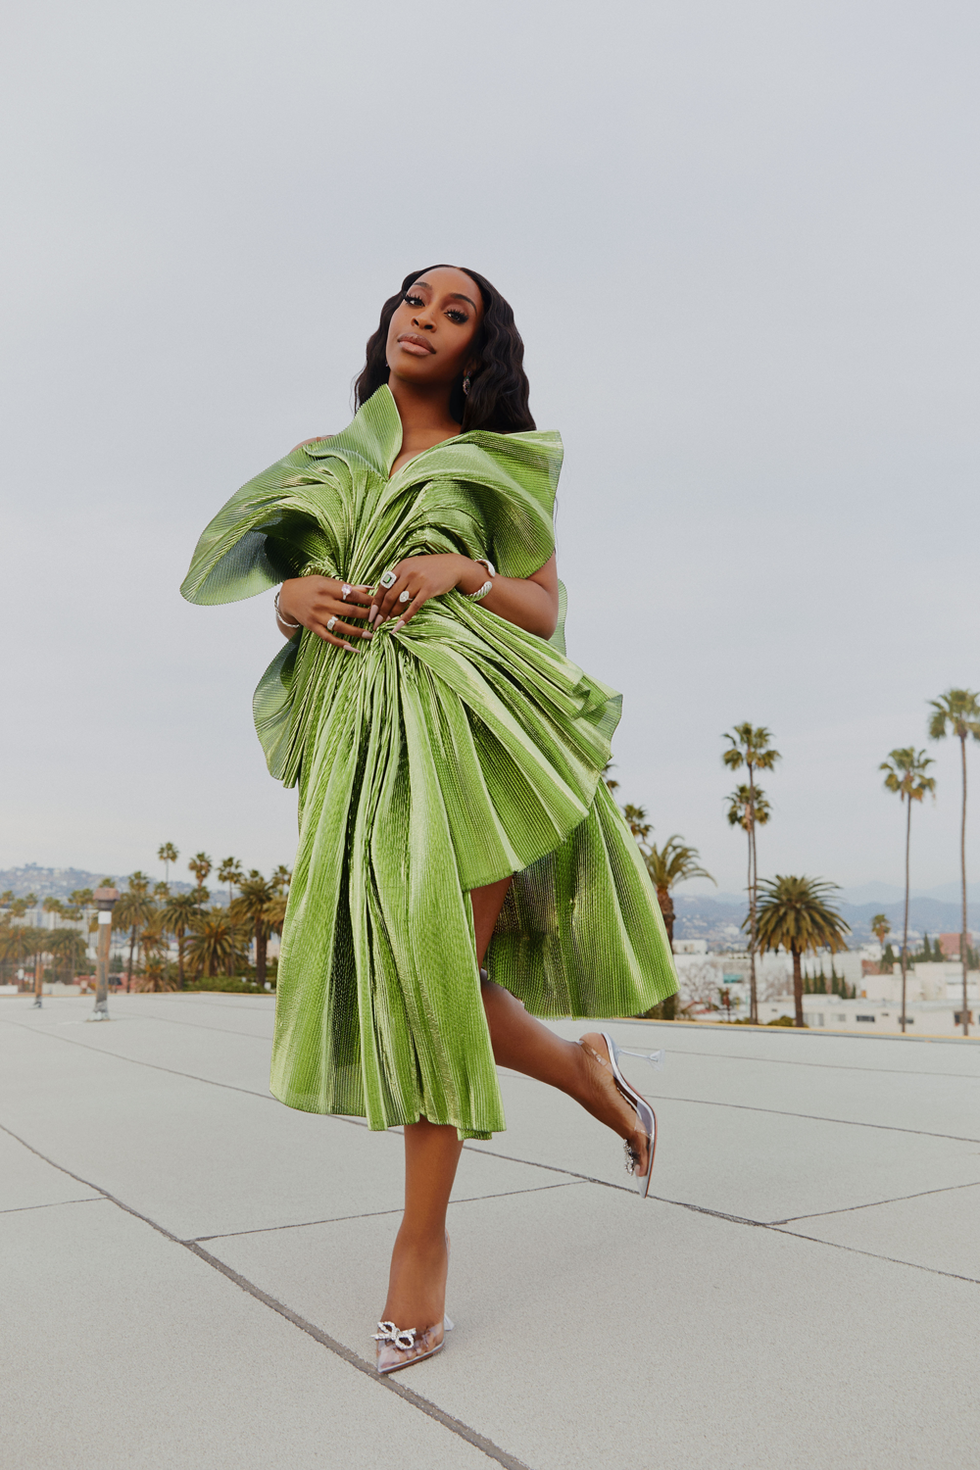 jackie aina in a green dress with palm trees and hills in the background